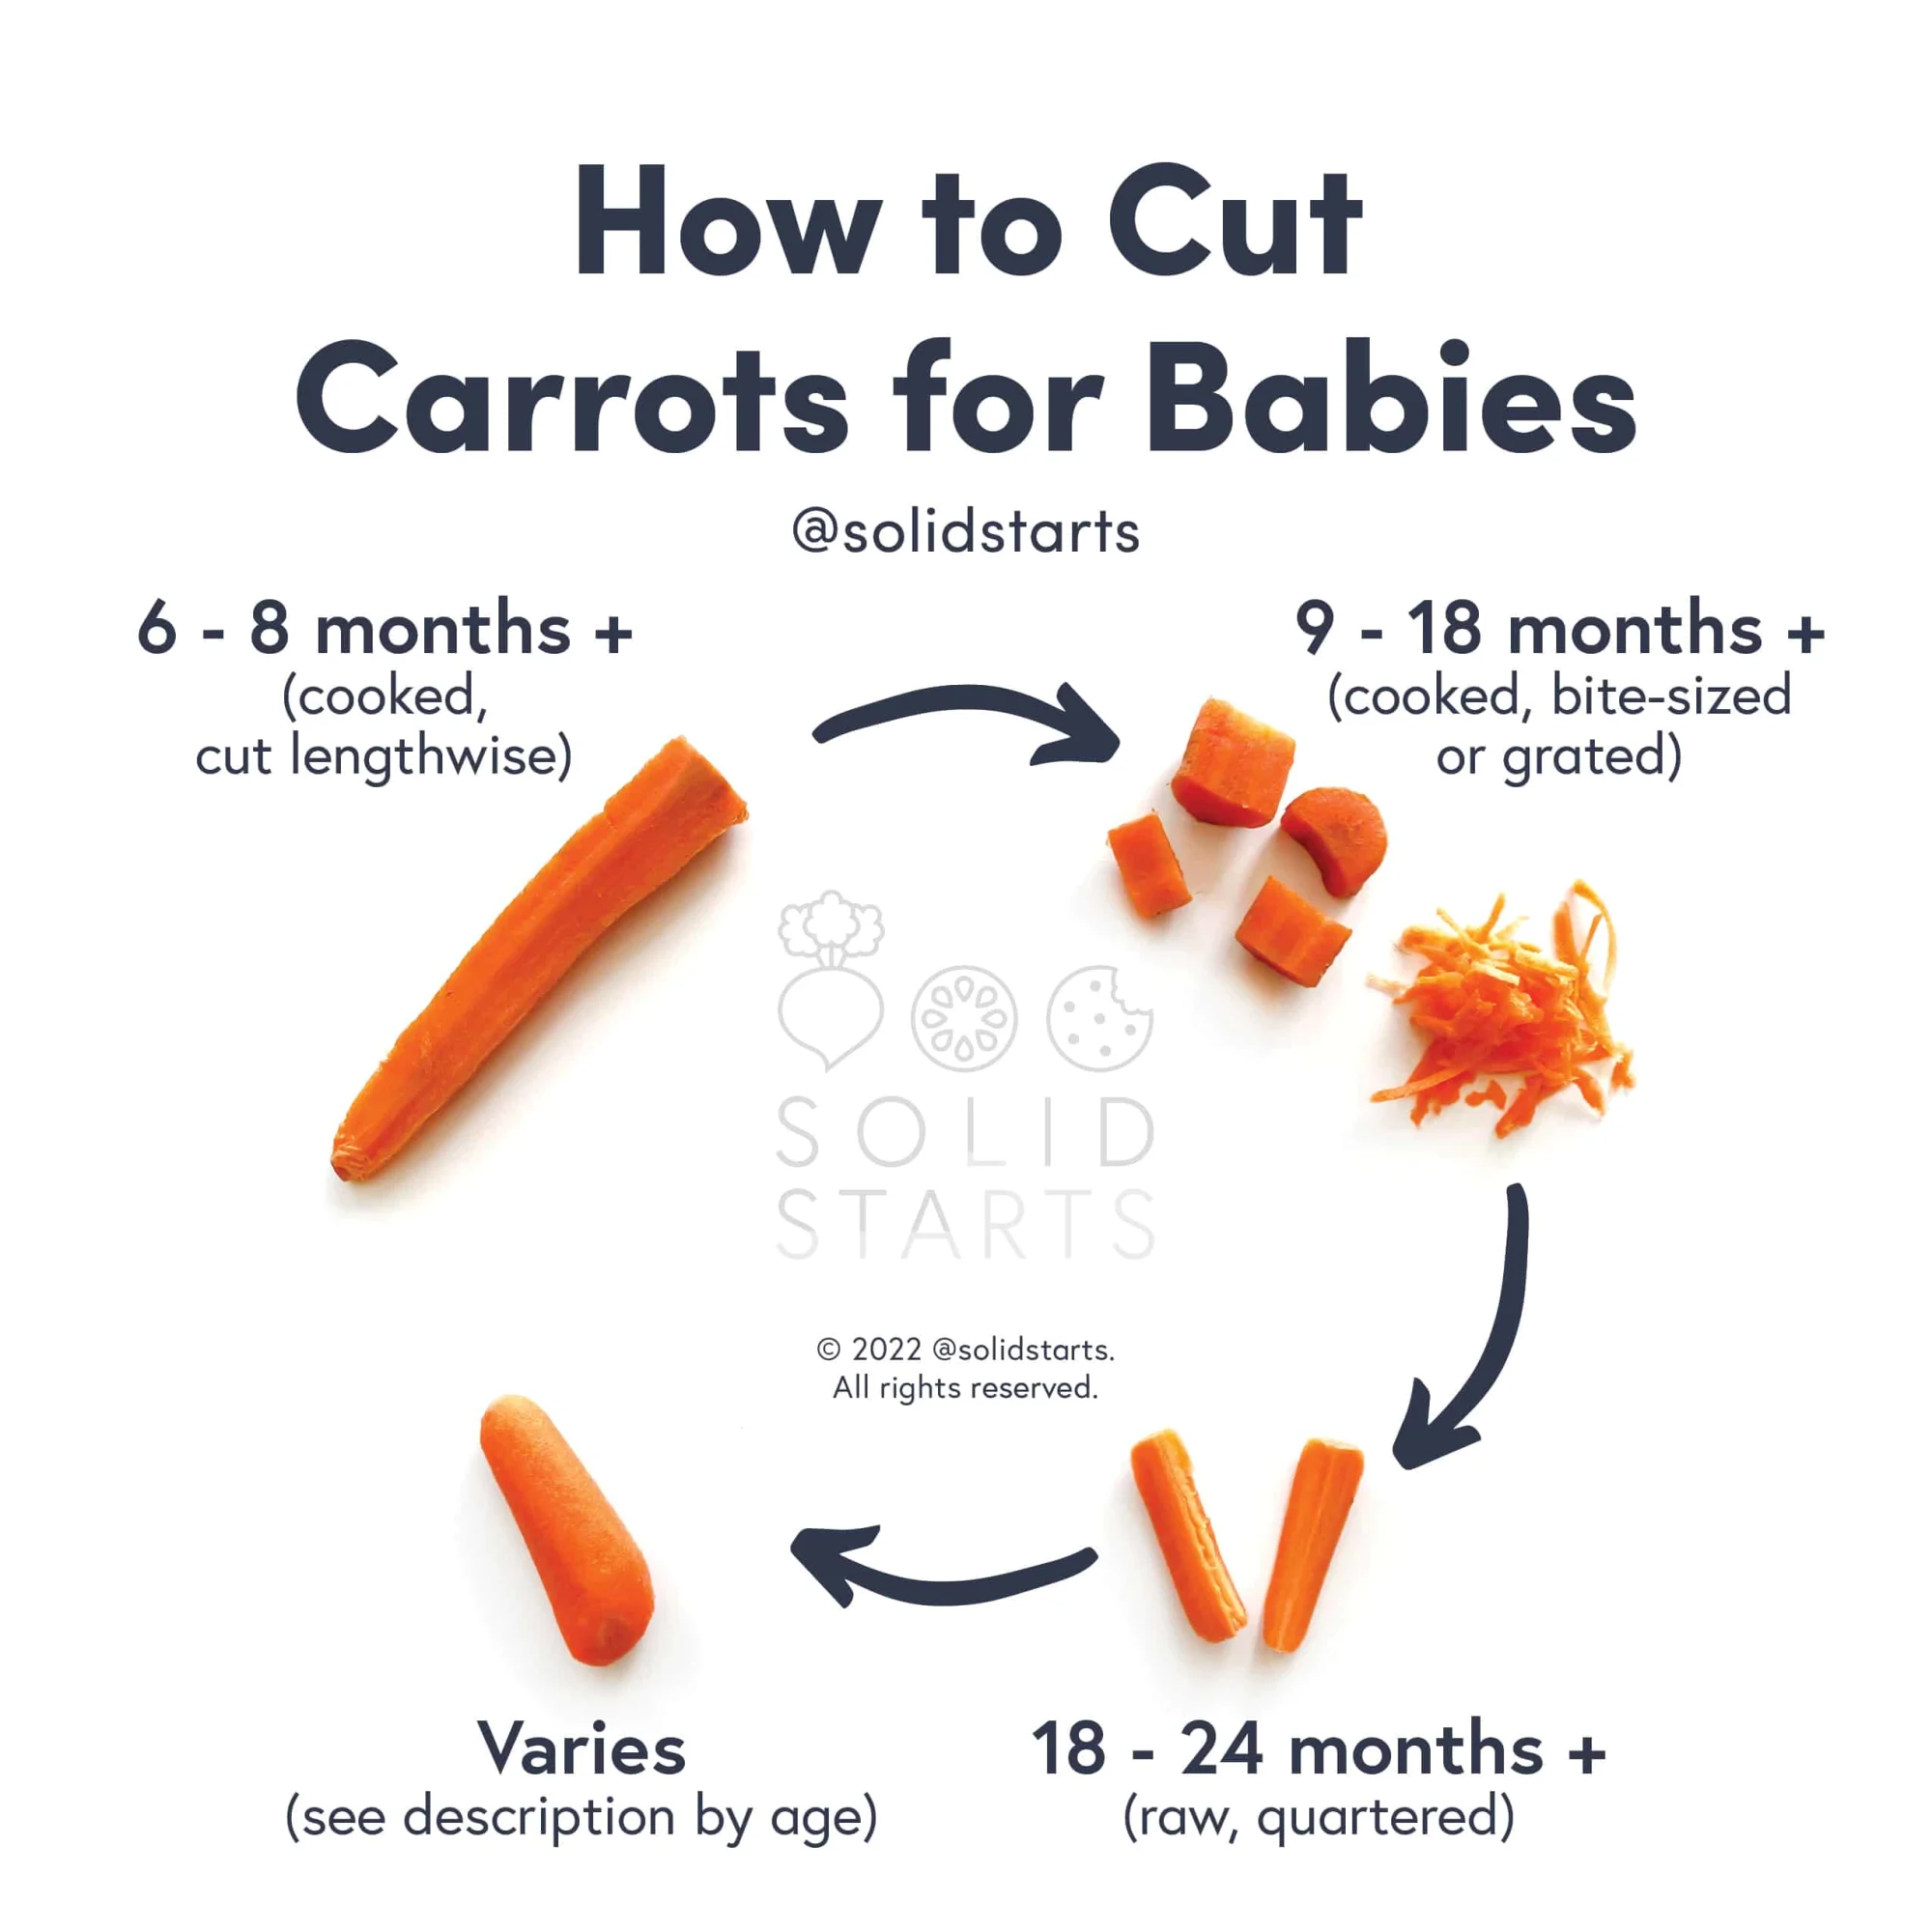 a Solid Starts infographic with the header "How to Cut Carrots for Babies": cooked and cut lengthwise for 6-8 mos+, cooked bite size pieces or grated for 9-18 mos+, raw quartered sticks for 18-24 mos+, and varies for whole raw baby carrots